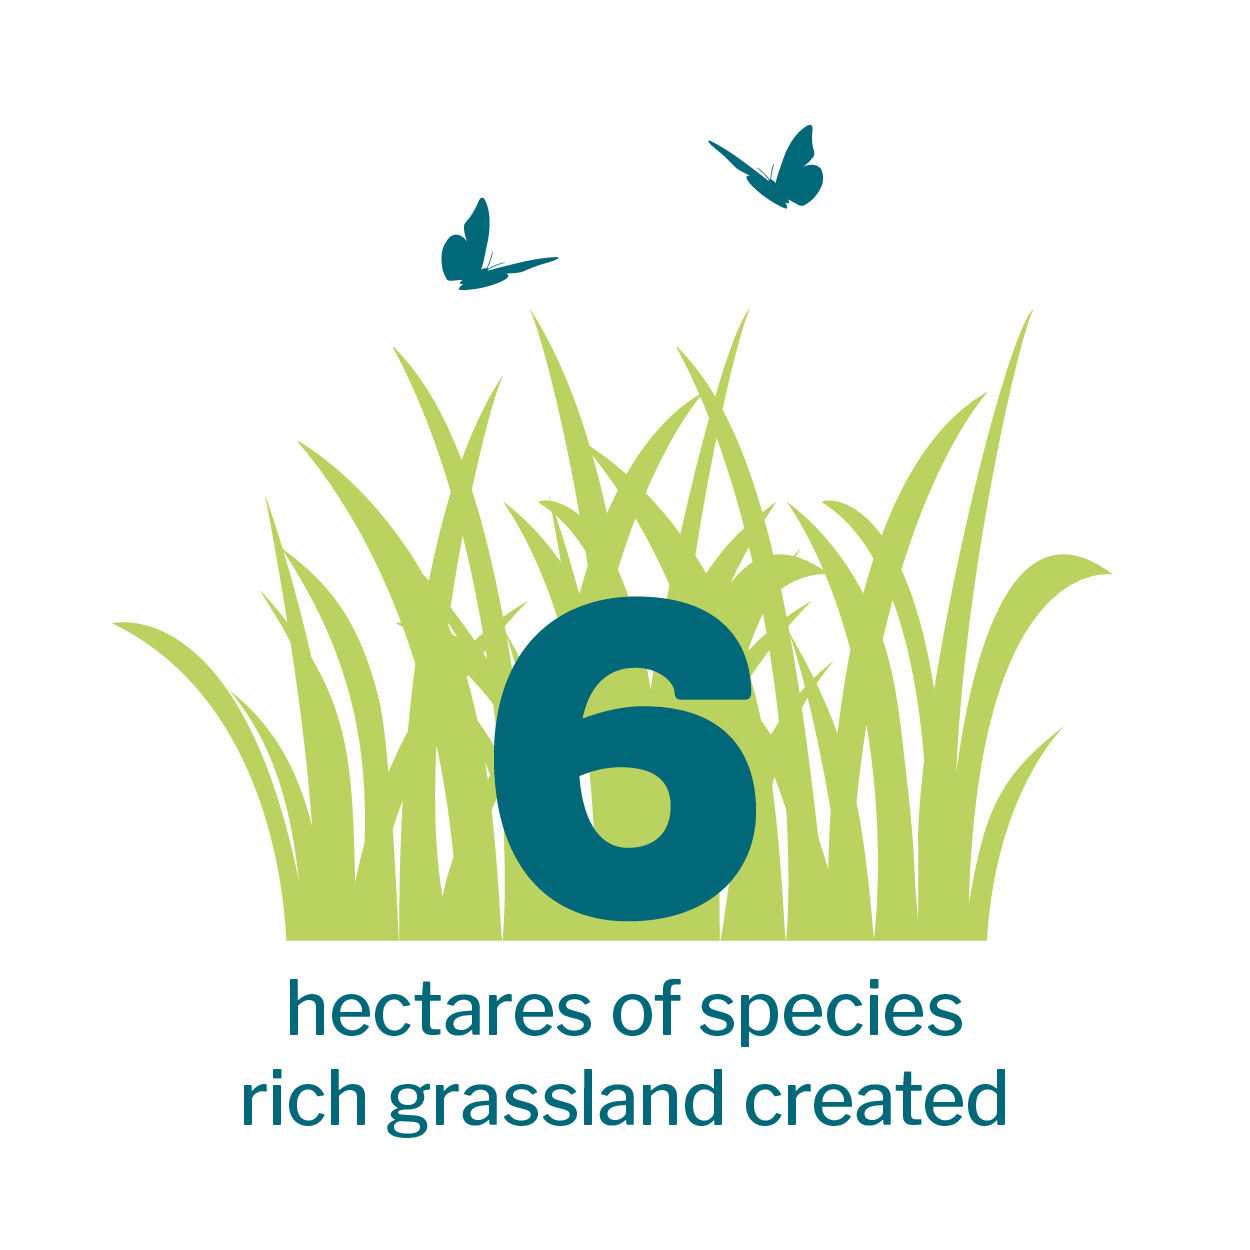 Grass and butterfly icon that reads: 6 hectares of species rich grassland created